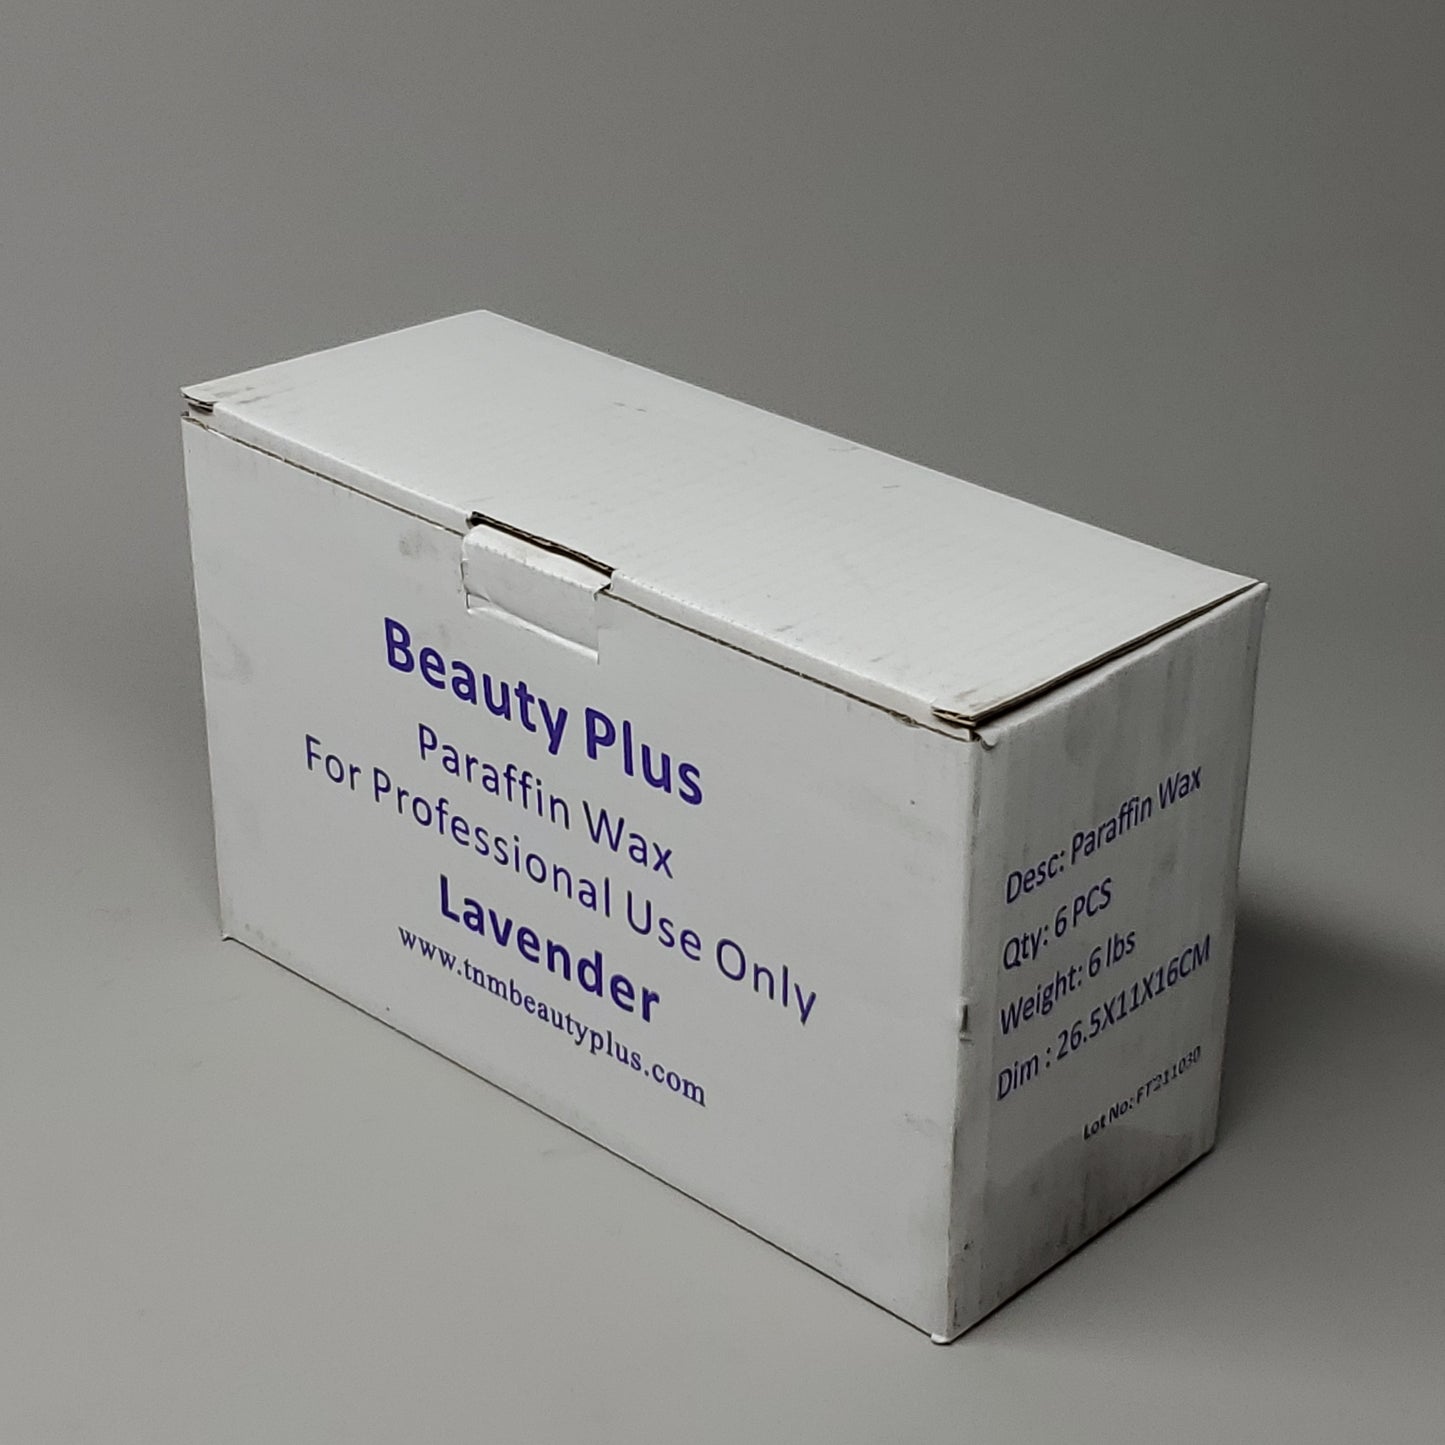 BEAUTY PLUS 6 Pack Of Paraffin Wax Refills Lavender 1 LBS  (New)